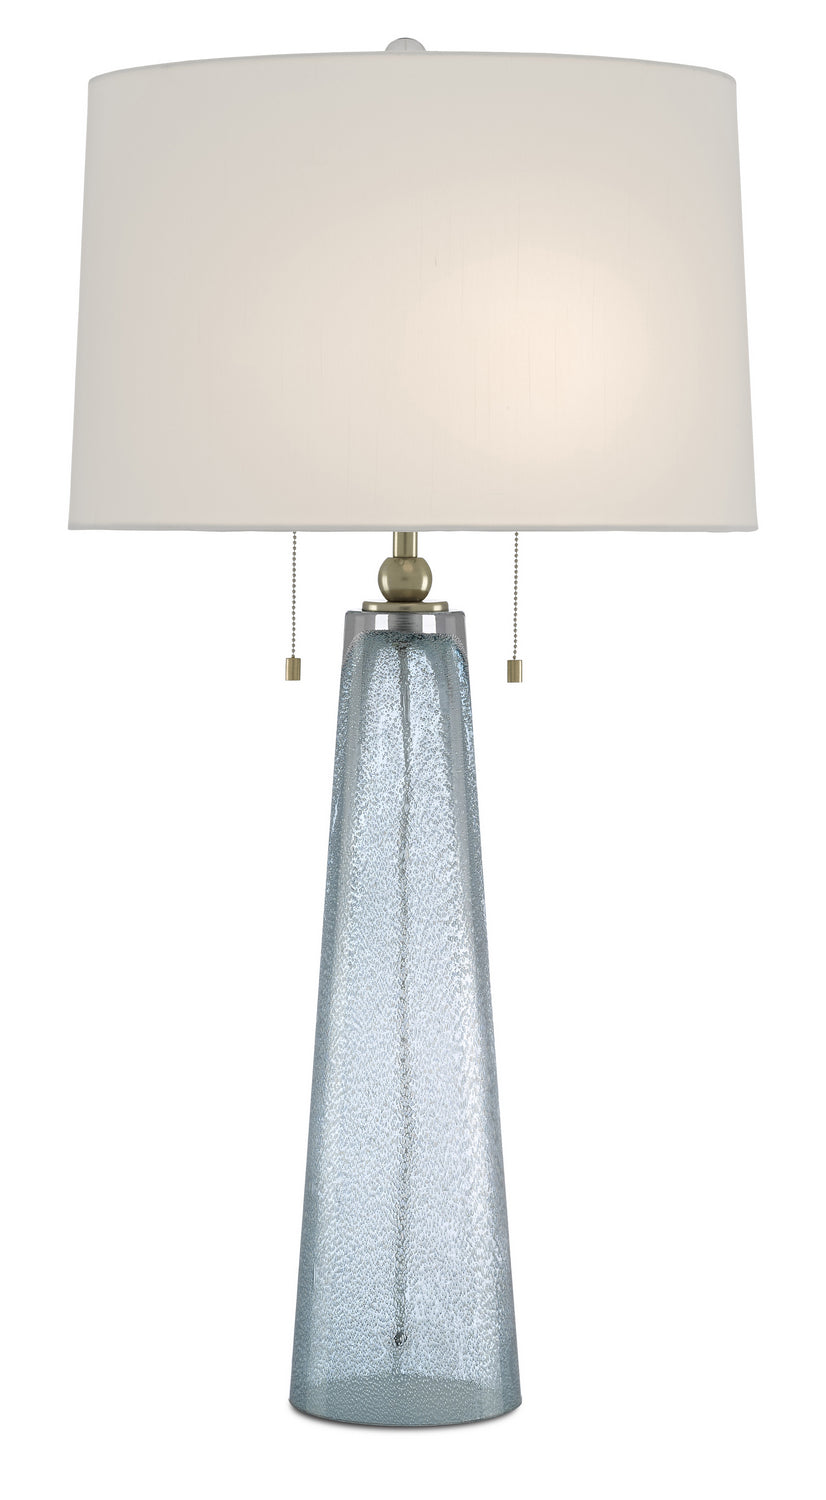 Two Light Table Lamp from the Looke collection in Blue/Brass finish